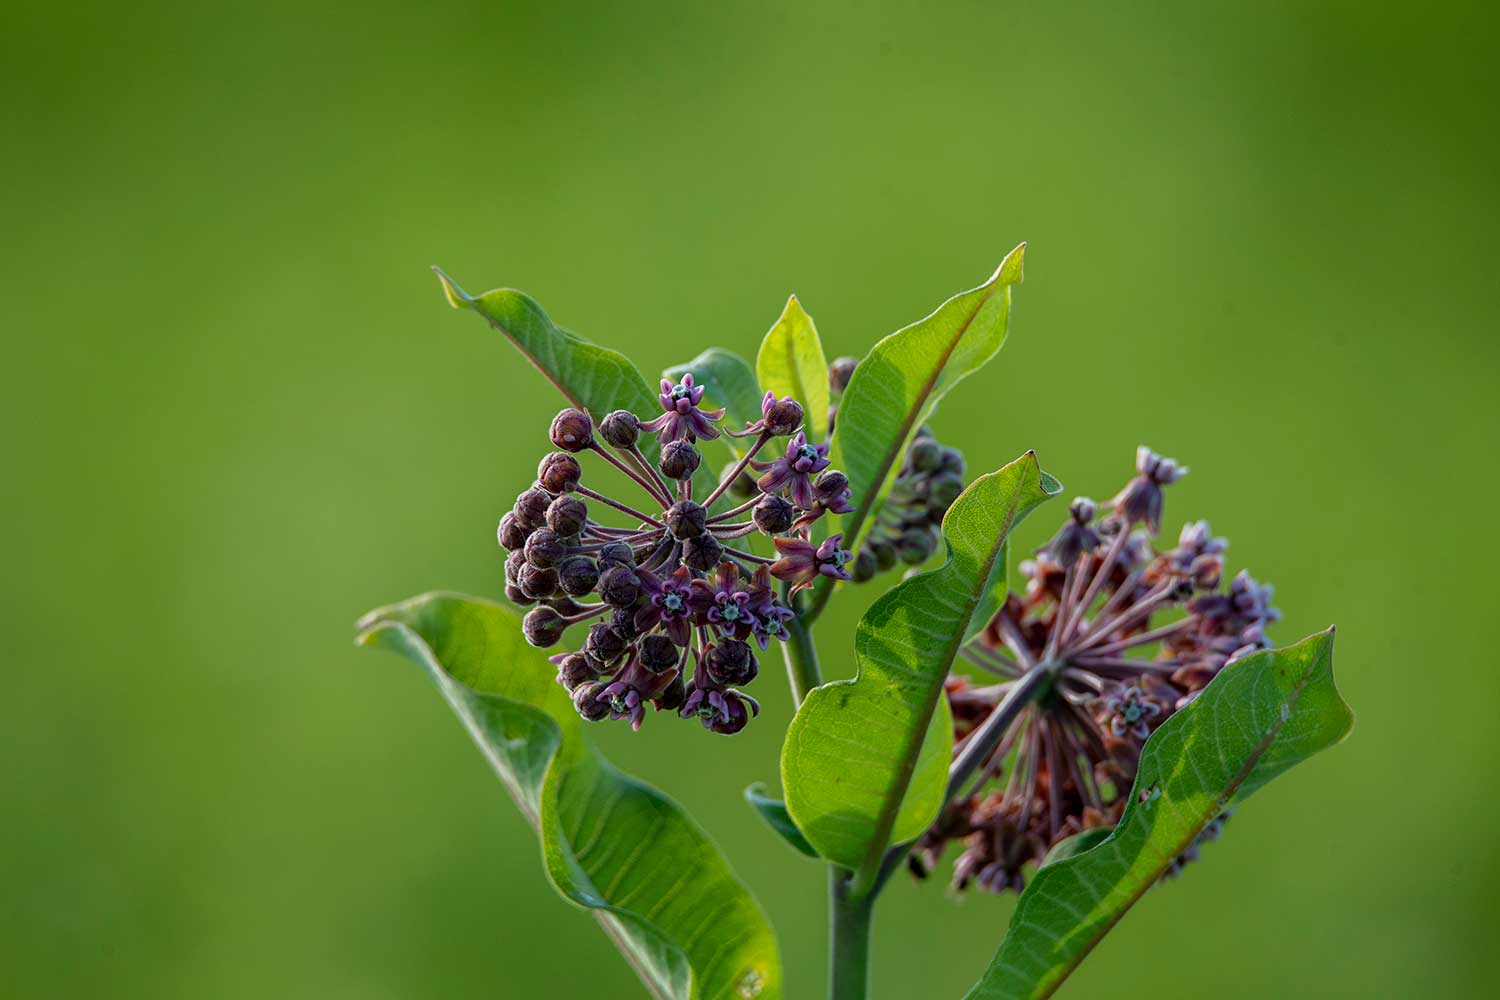 The purple blooms of a common milkweed plant.